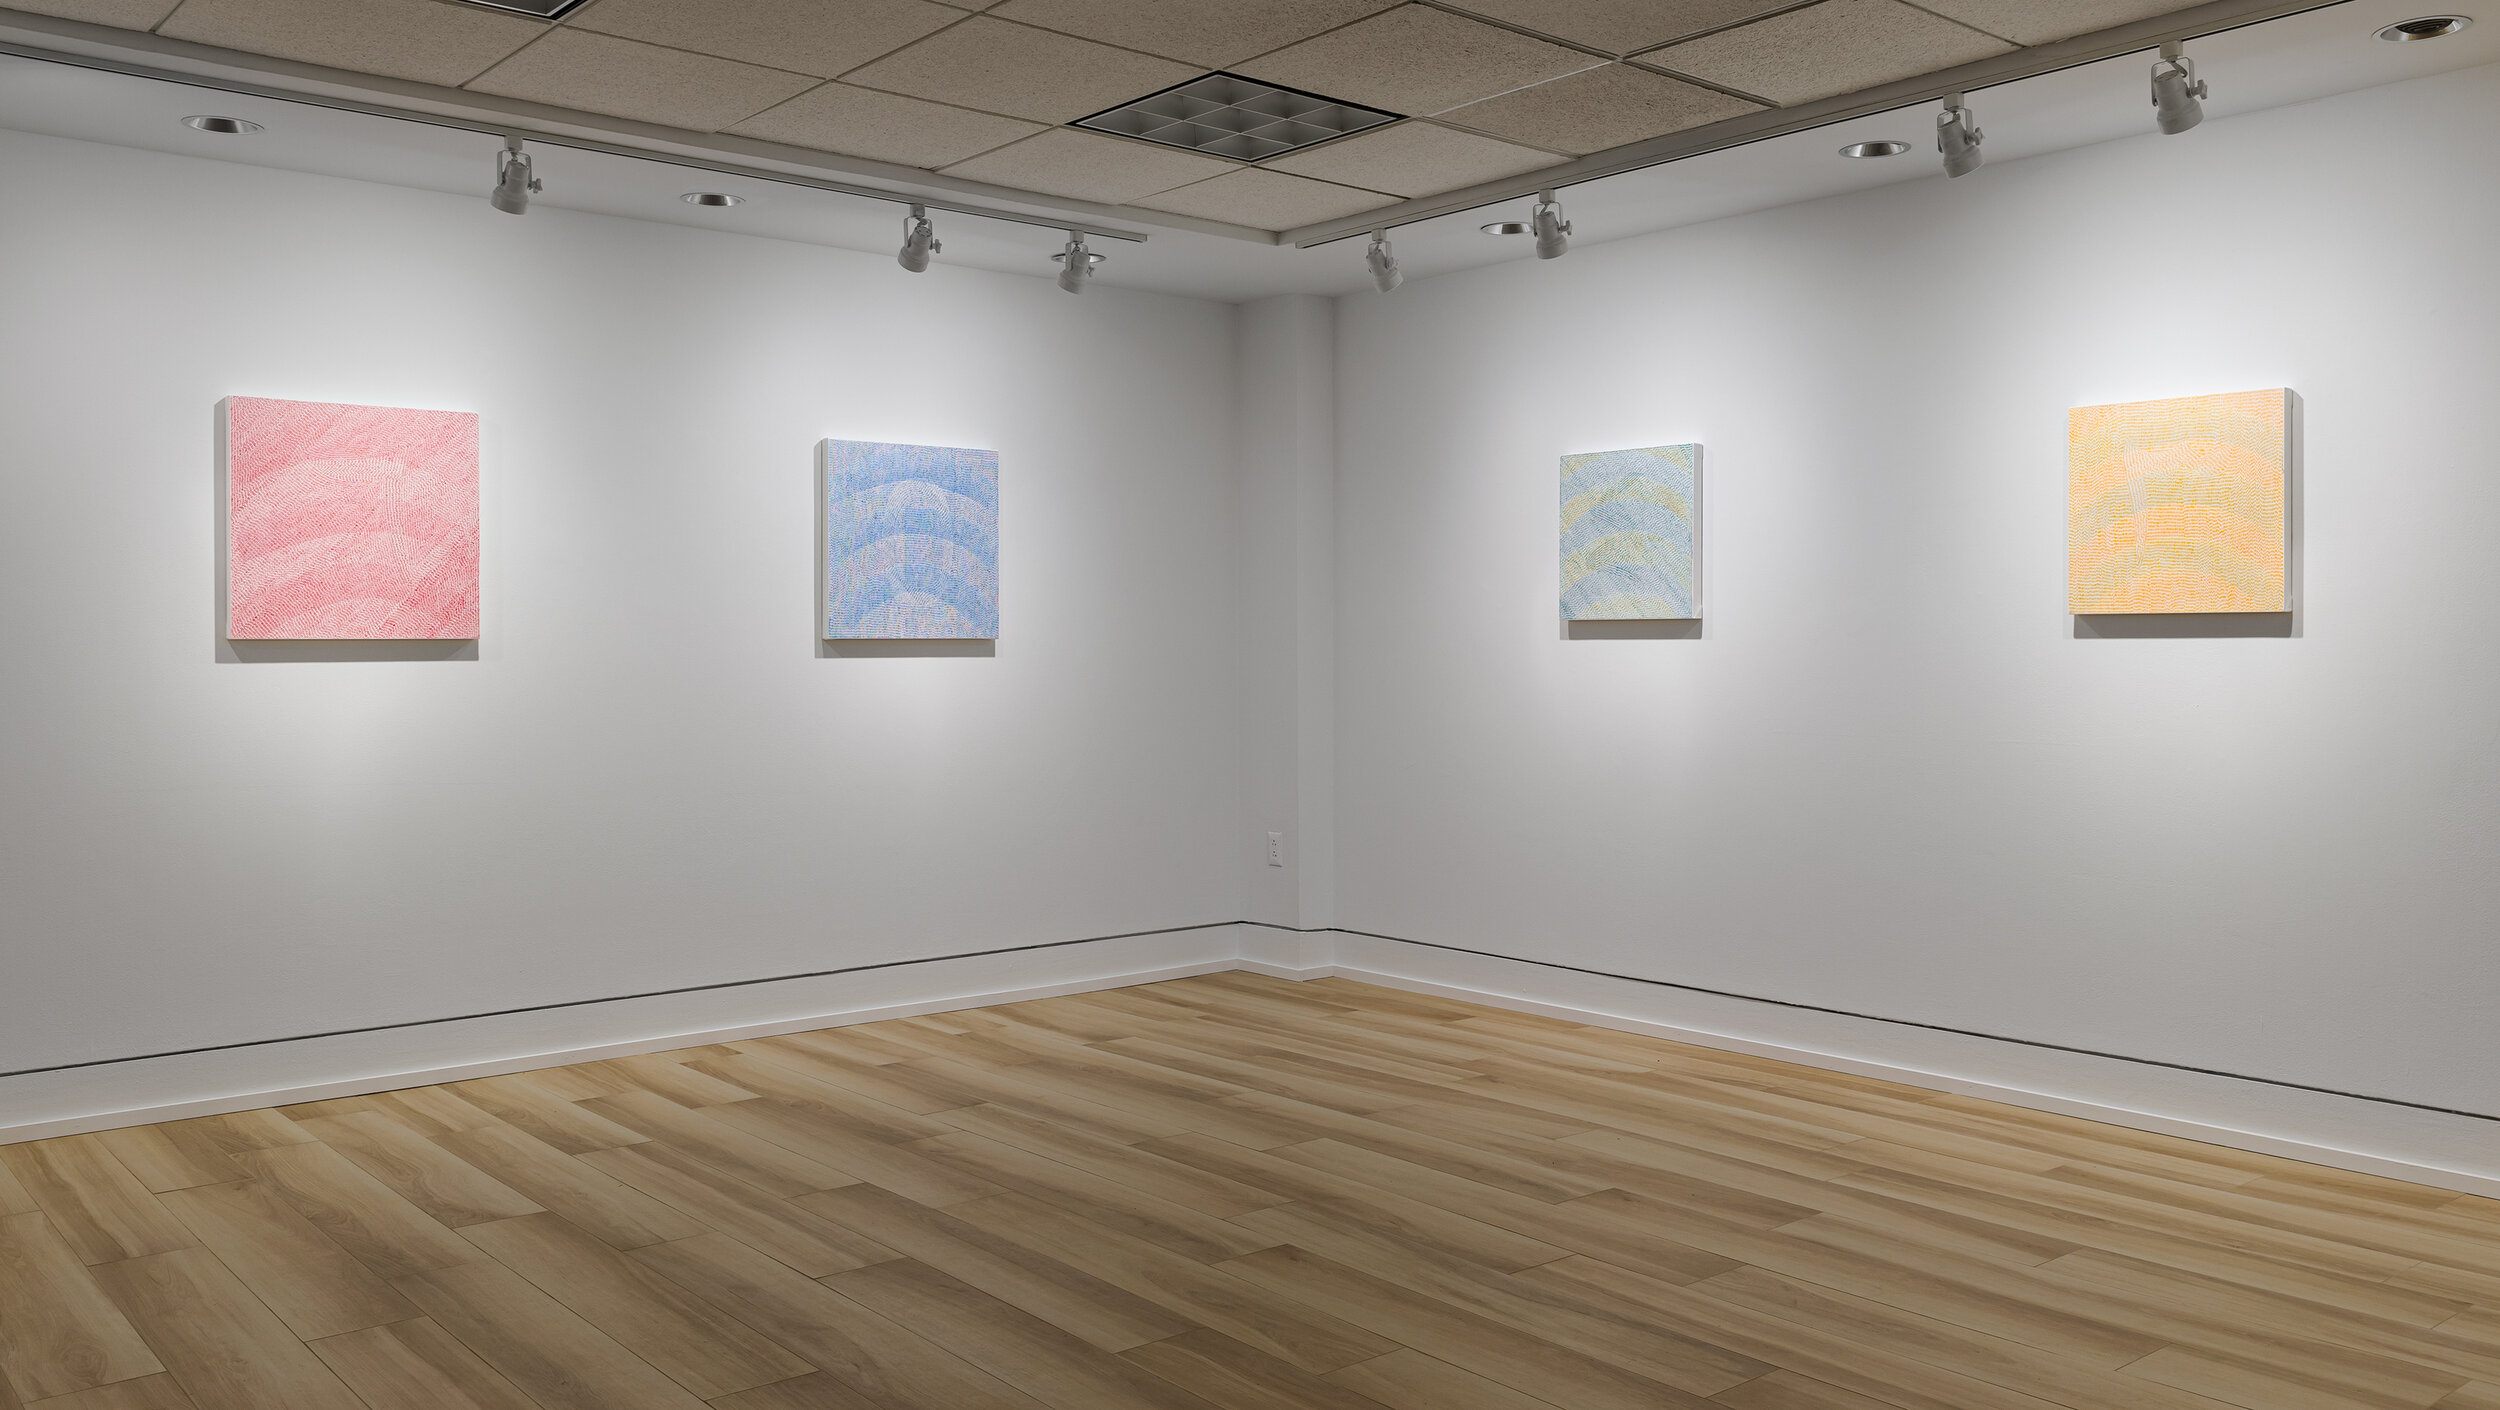 Ascension: Visual Arts Center of New Jersey (September 27, 2019 - February 9, 2020)